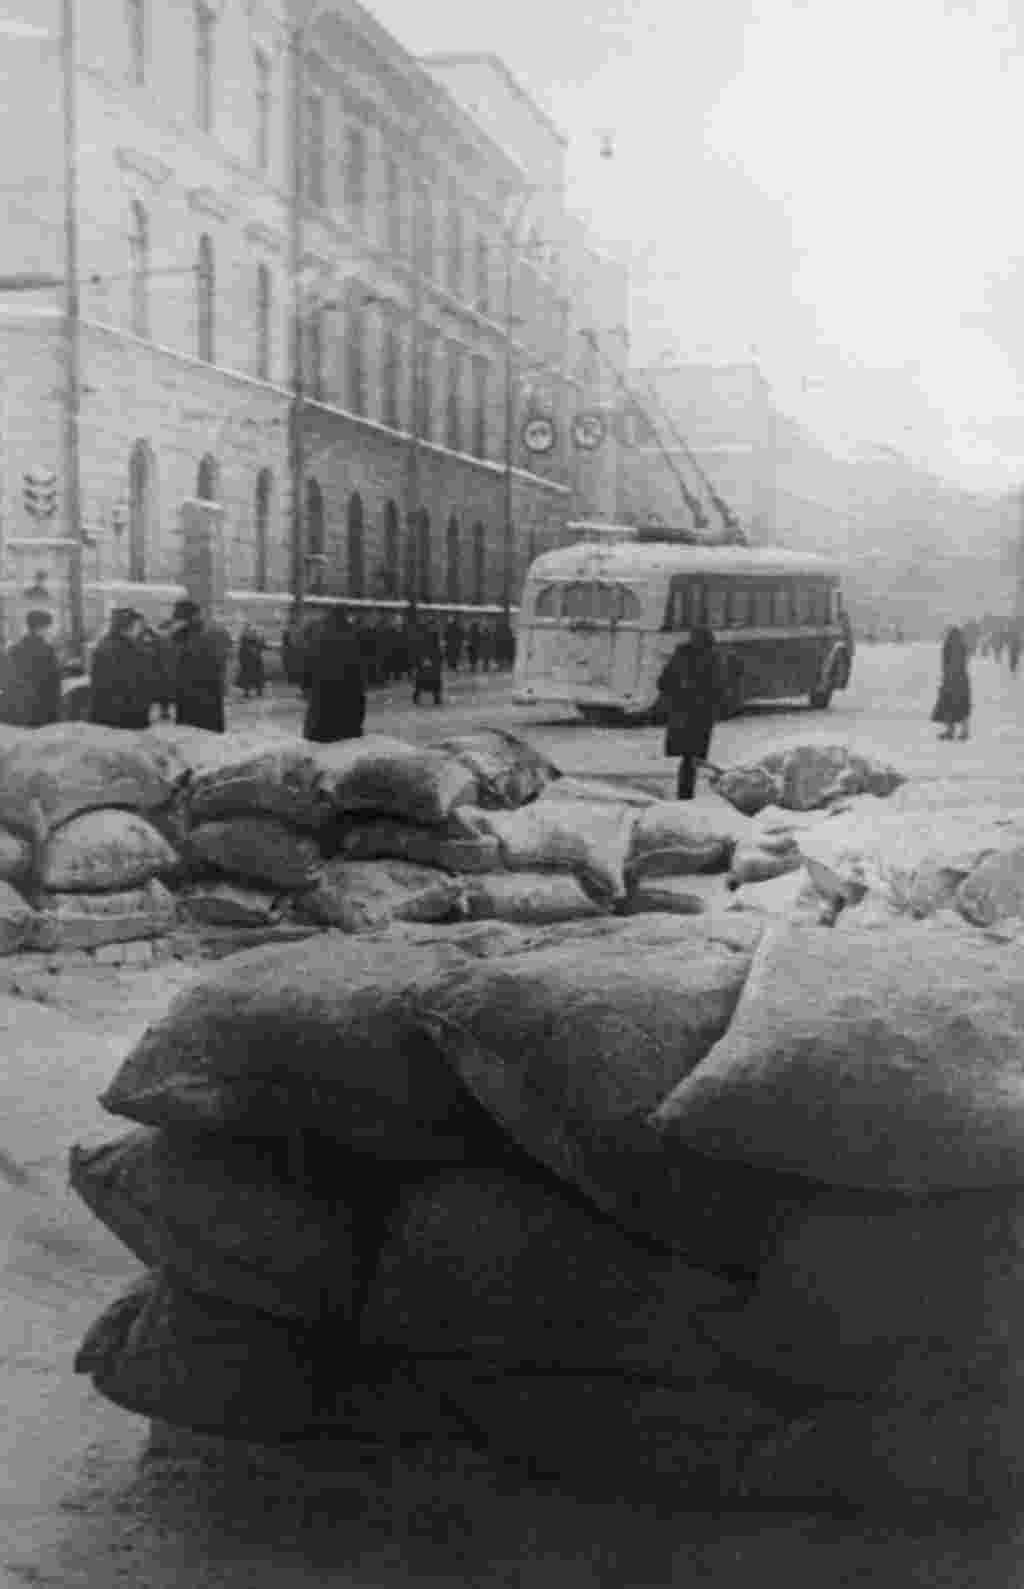 A trolleybus drives past barricades at the Kirov Gate in Moscow, in November 1941.